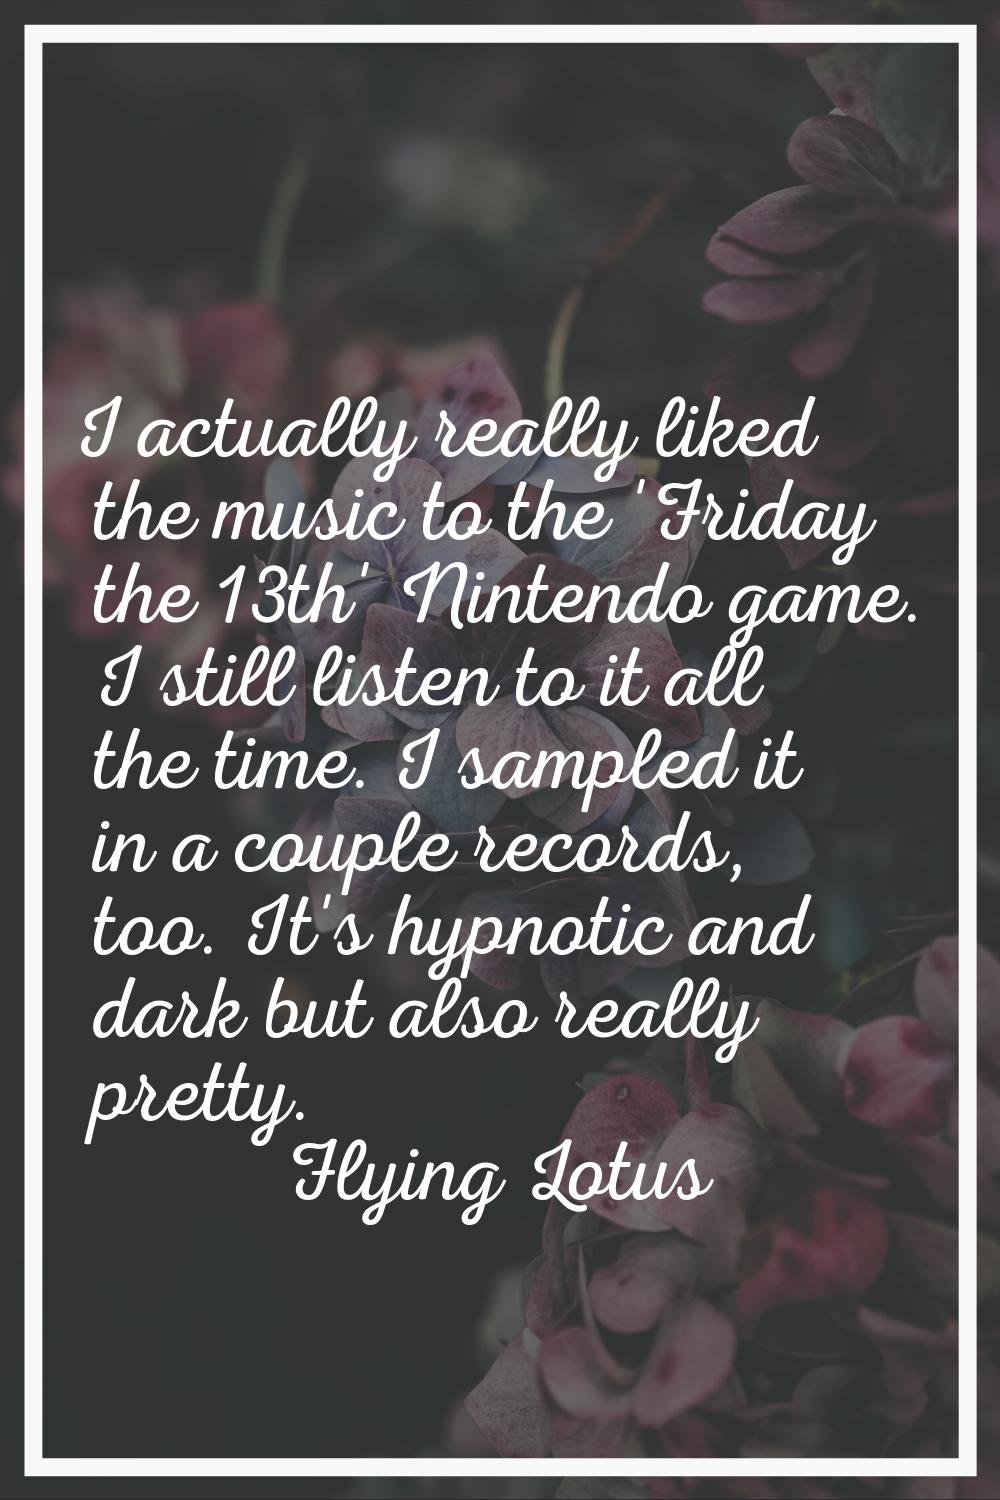 I actually really liked the music to the 'Friday the 13th' Nintendo game. I still listen to it all 